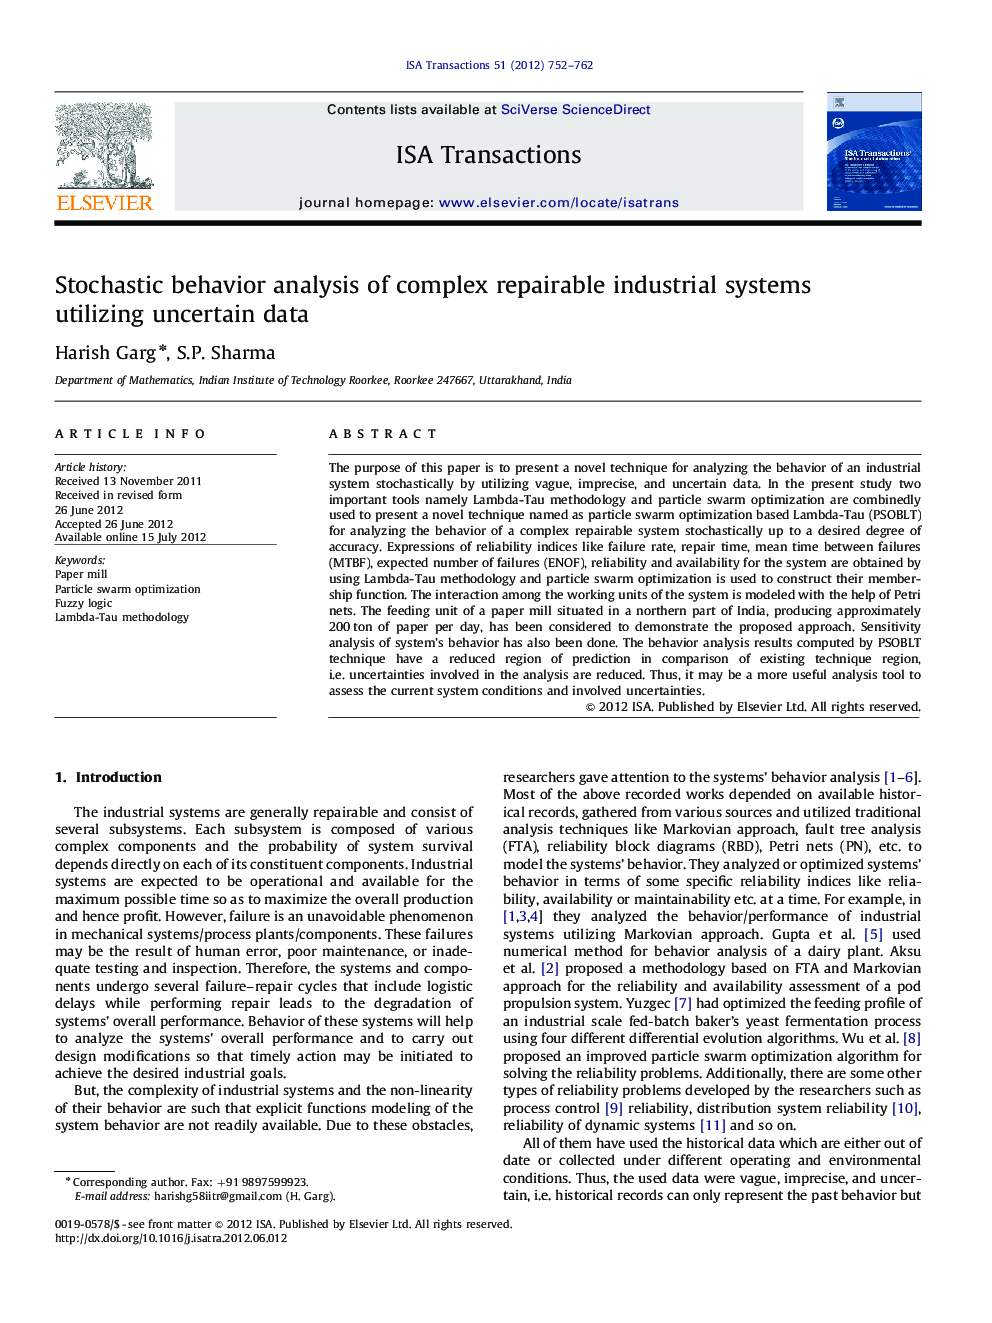 Stochastic behavior analysis of complex repairable industrial systems utilizing uncertain data